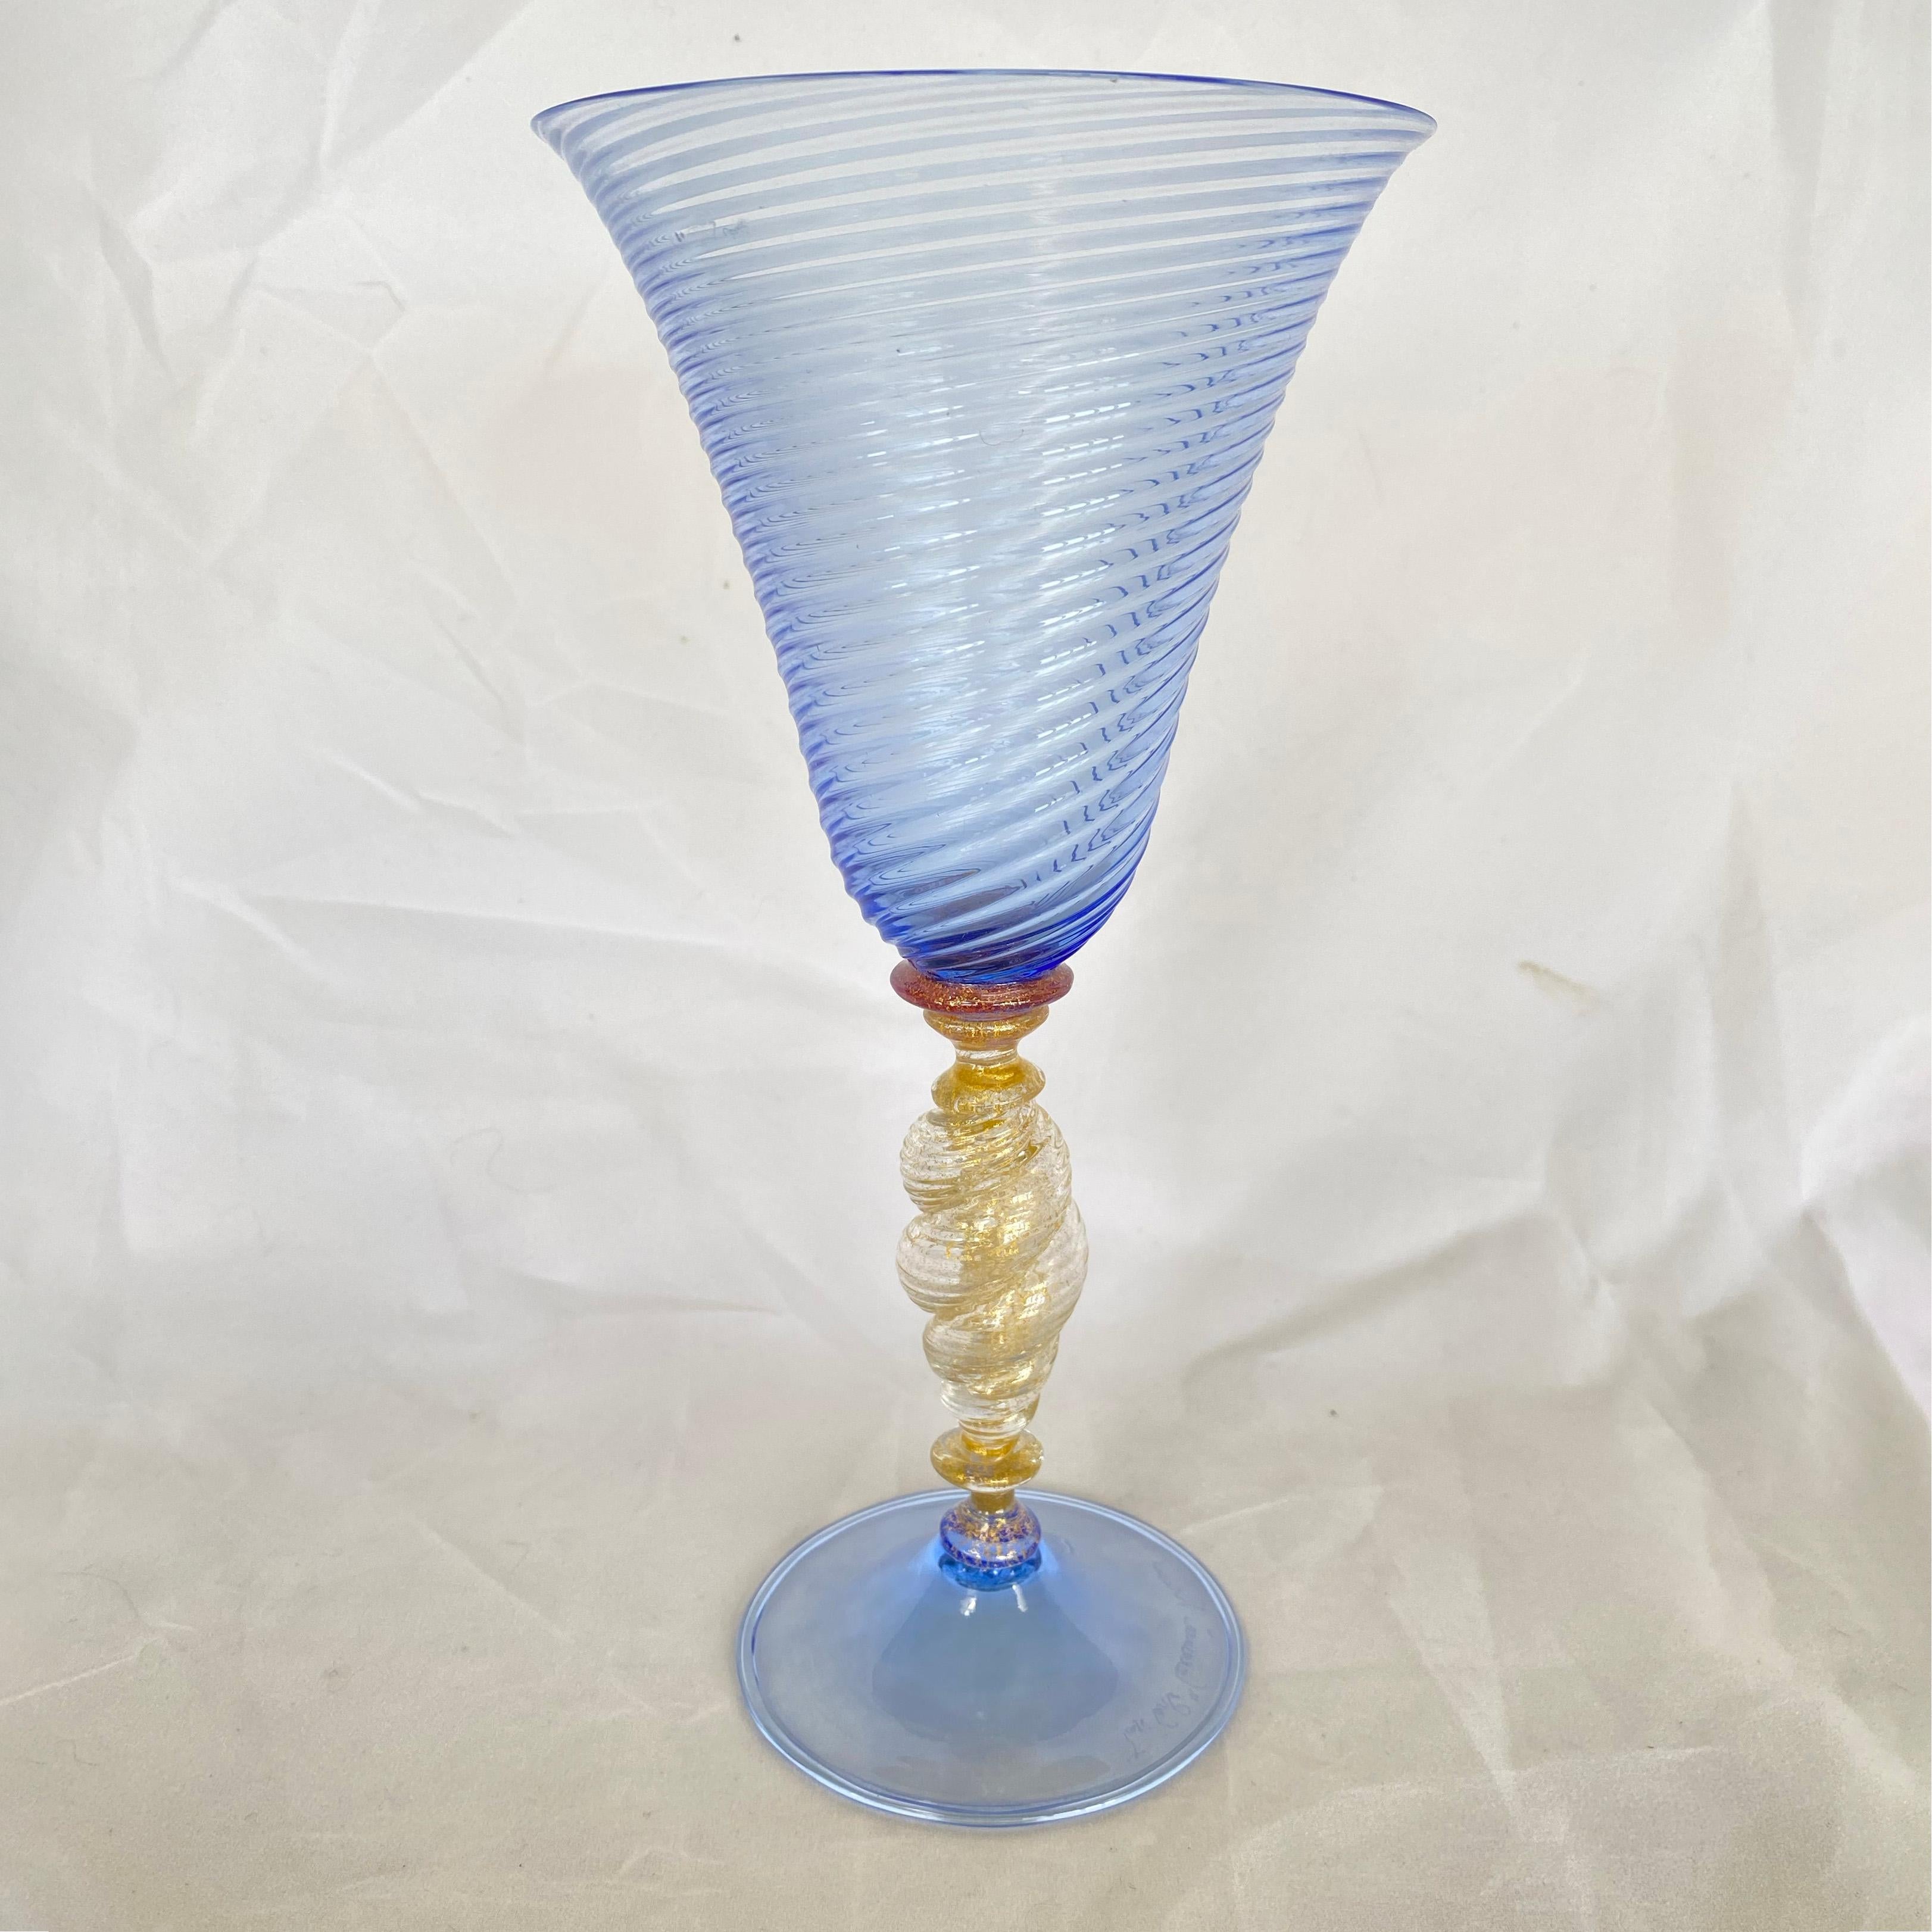 Blue swirls and gold dust.
From Italy. Handmade and signed by Murano master glassmaker.
We have 15 of these gorgeous, highly-collectible art objects. All different, all one-of-a-kind. 
We will be listing all 15. Most have different signatures